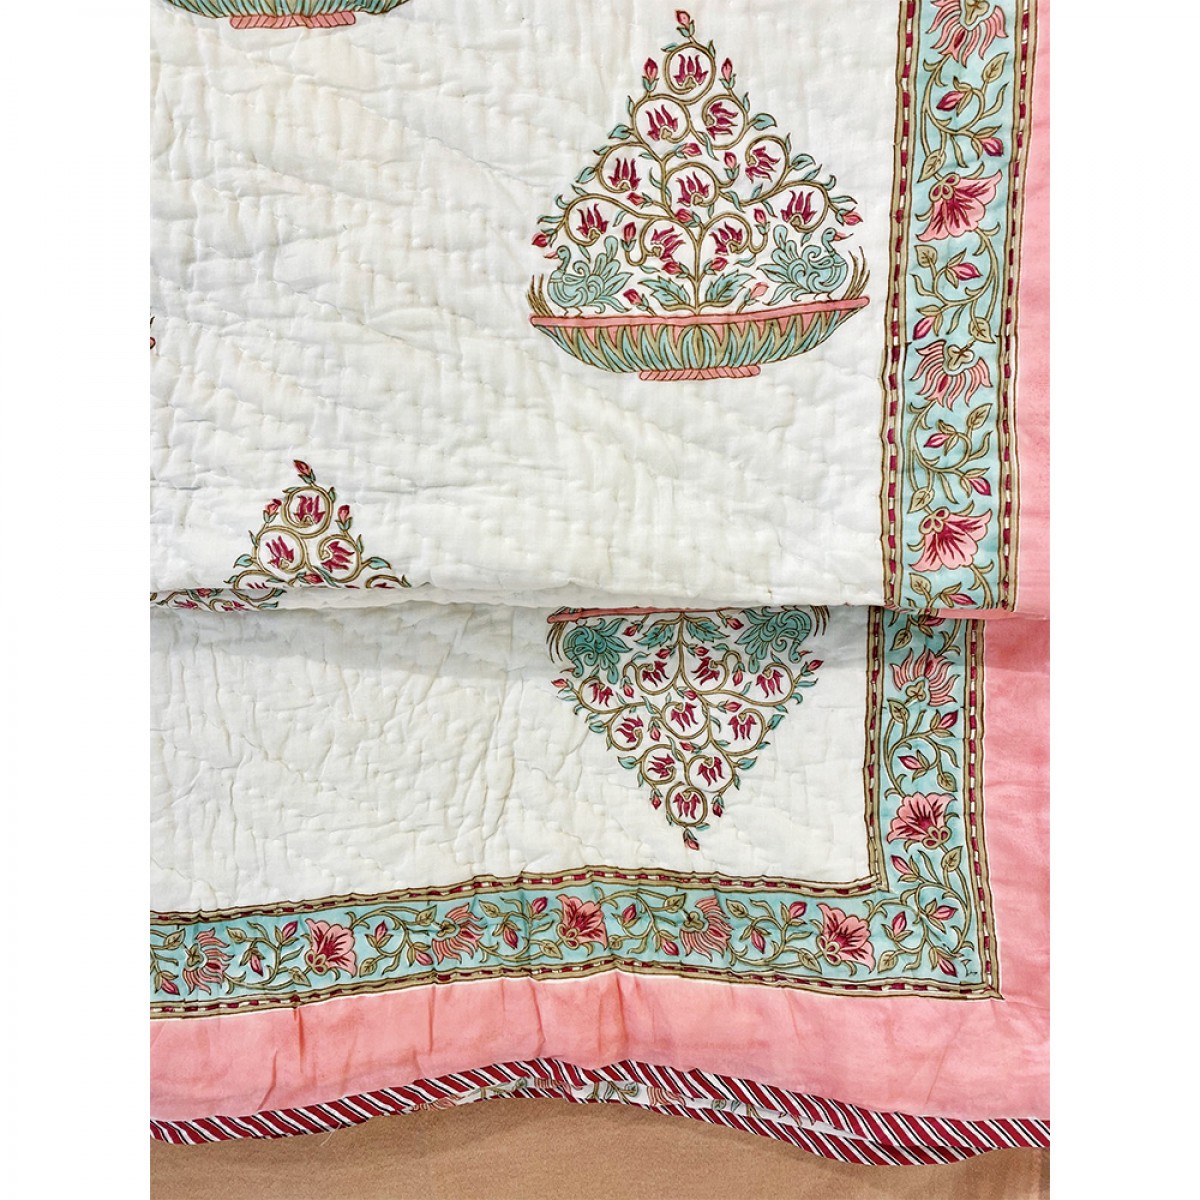 100% Cotton Hand Block Printed Queen Size Quilts - Coral Blossom